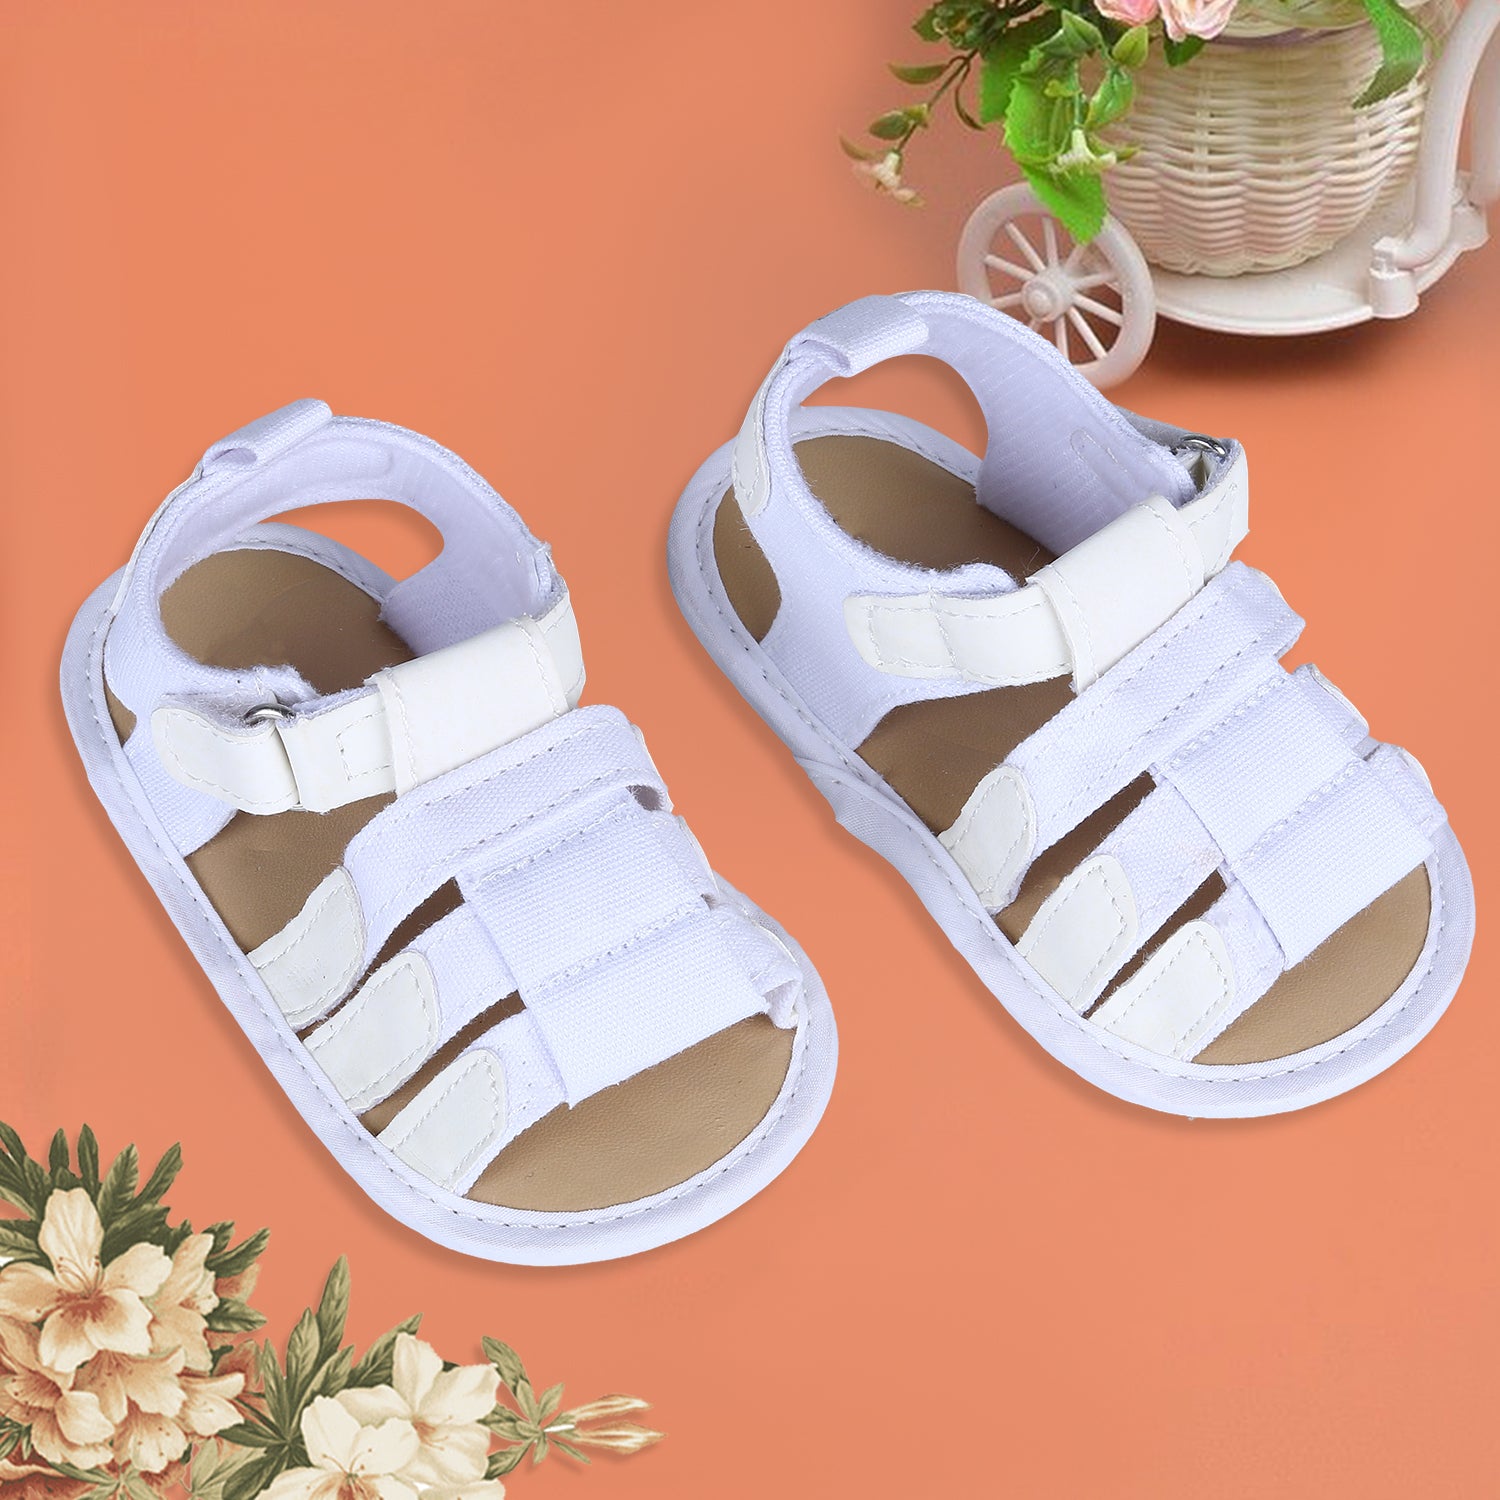 Plain Stylish And Comfortable Open Toe Sandal Booties - White